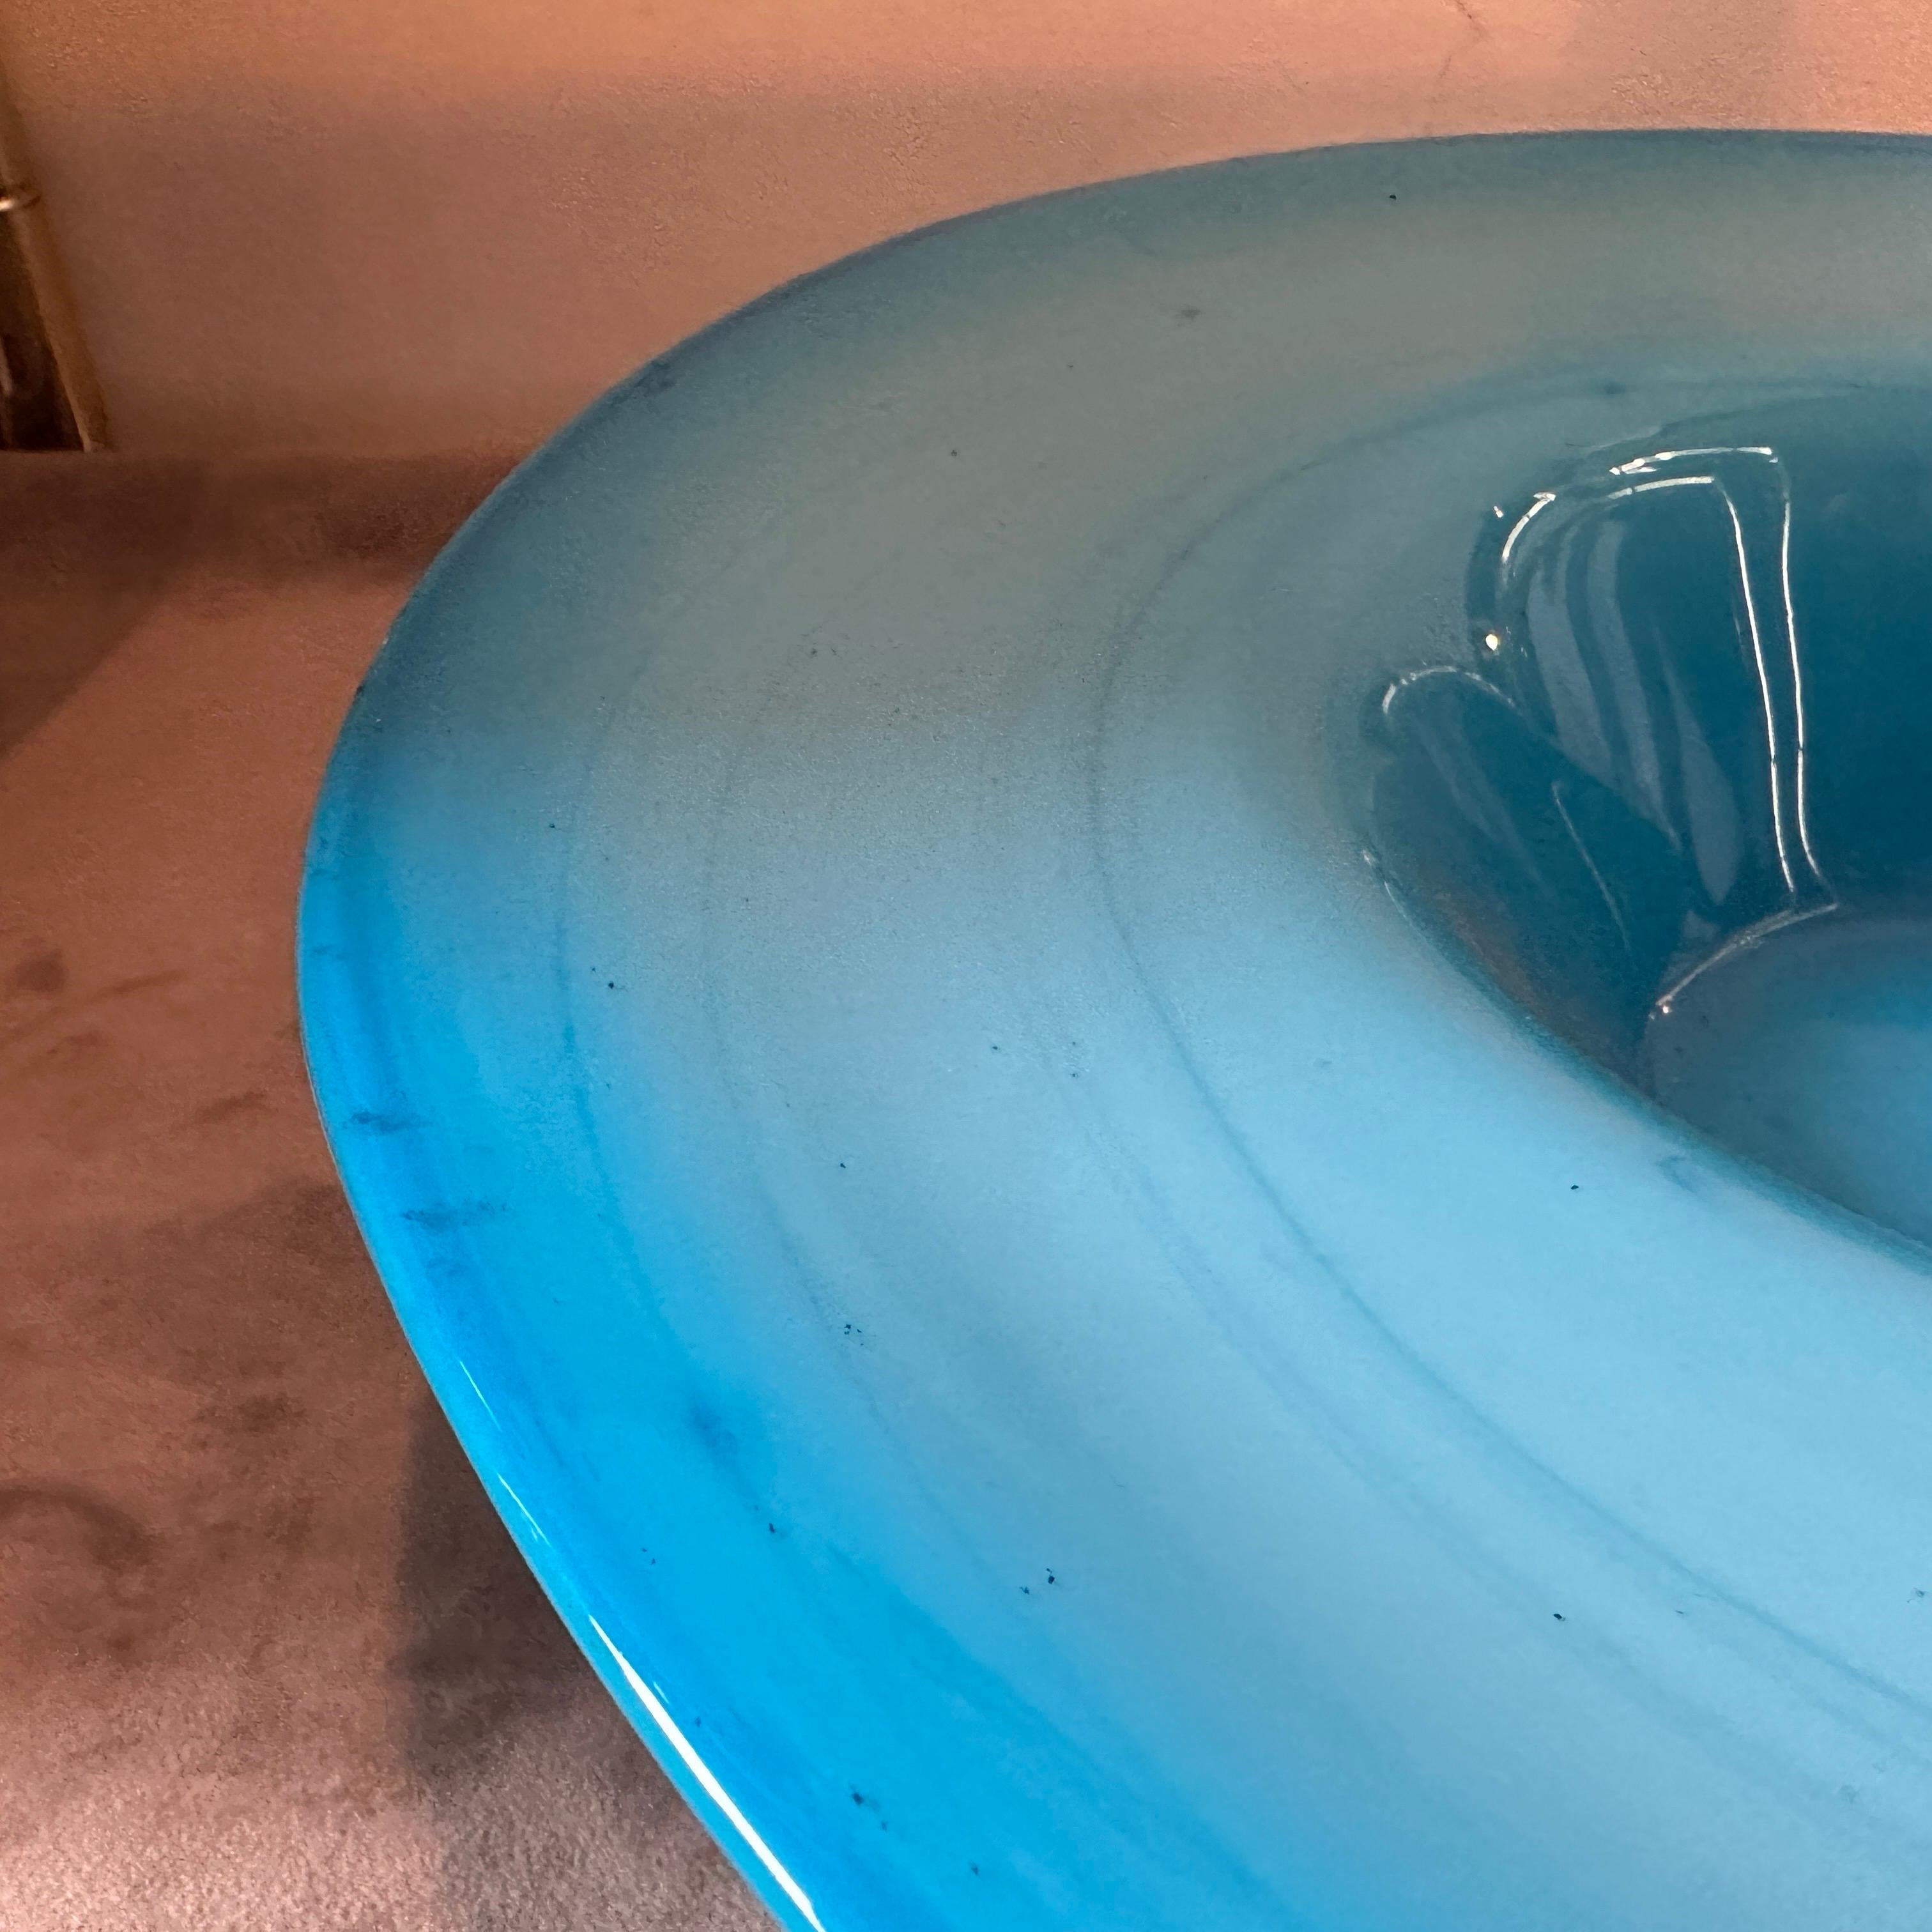 1980s Modern Turquoise and White Murano Glass Round Centerpiece For Sale 2